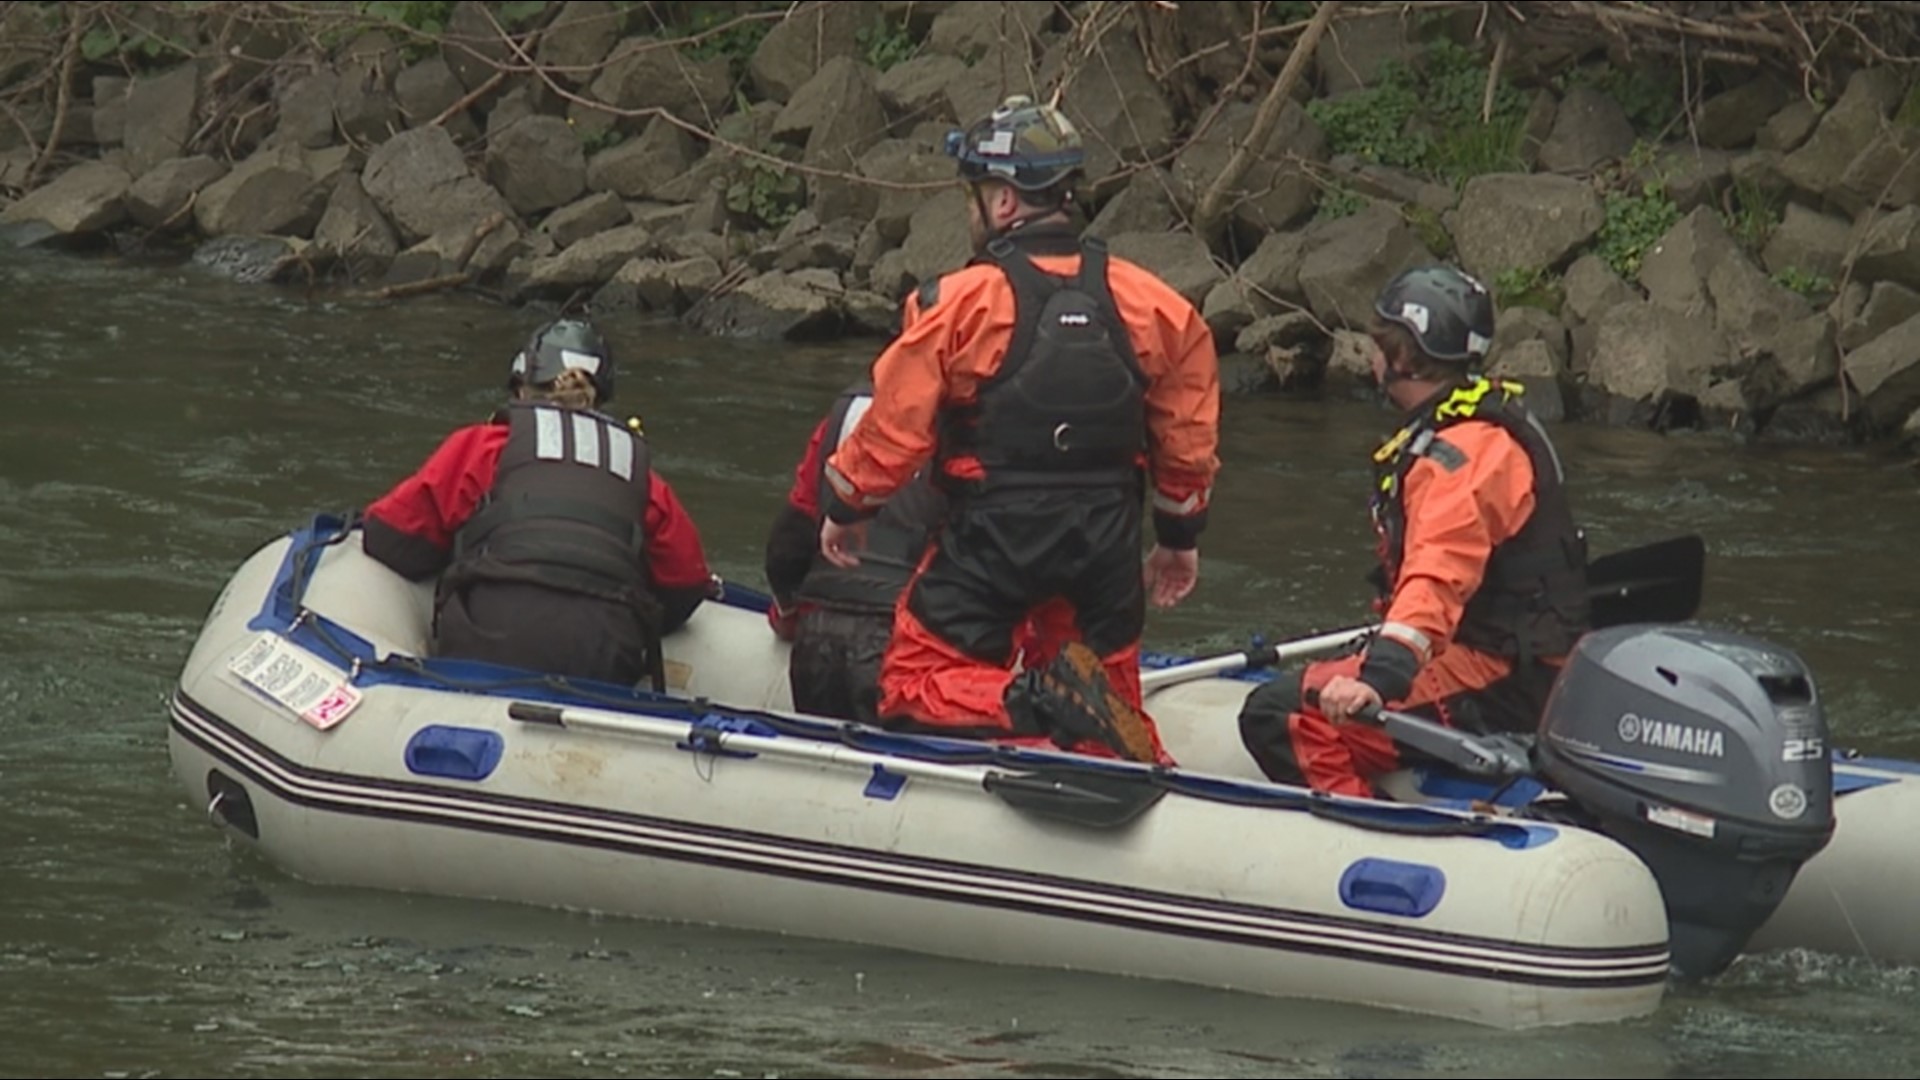 Authorities confirmed a 76-year-old man was found dead in the Conestoga river near Circle Avenue in Lancaster.